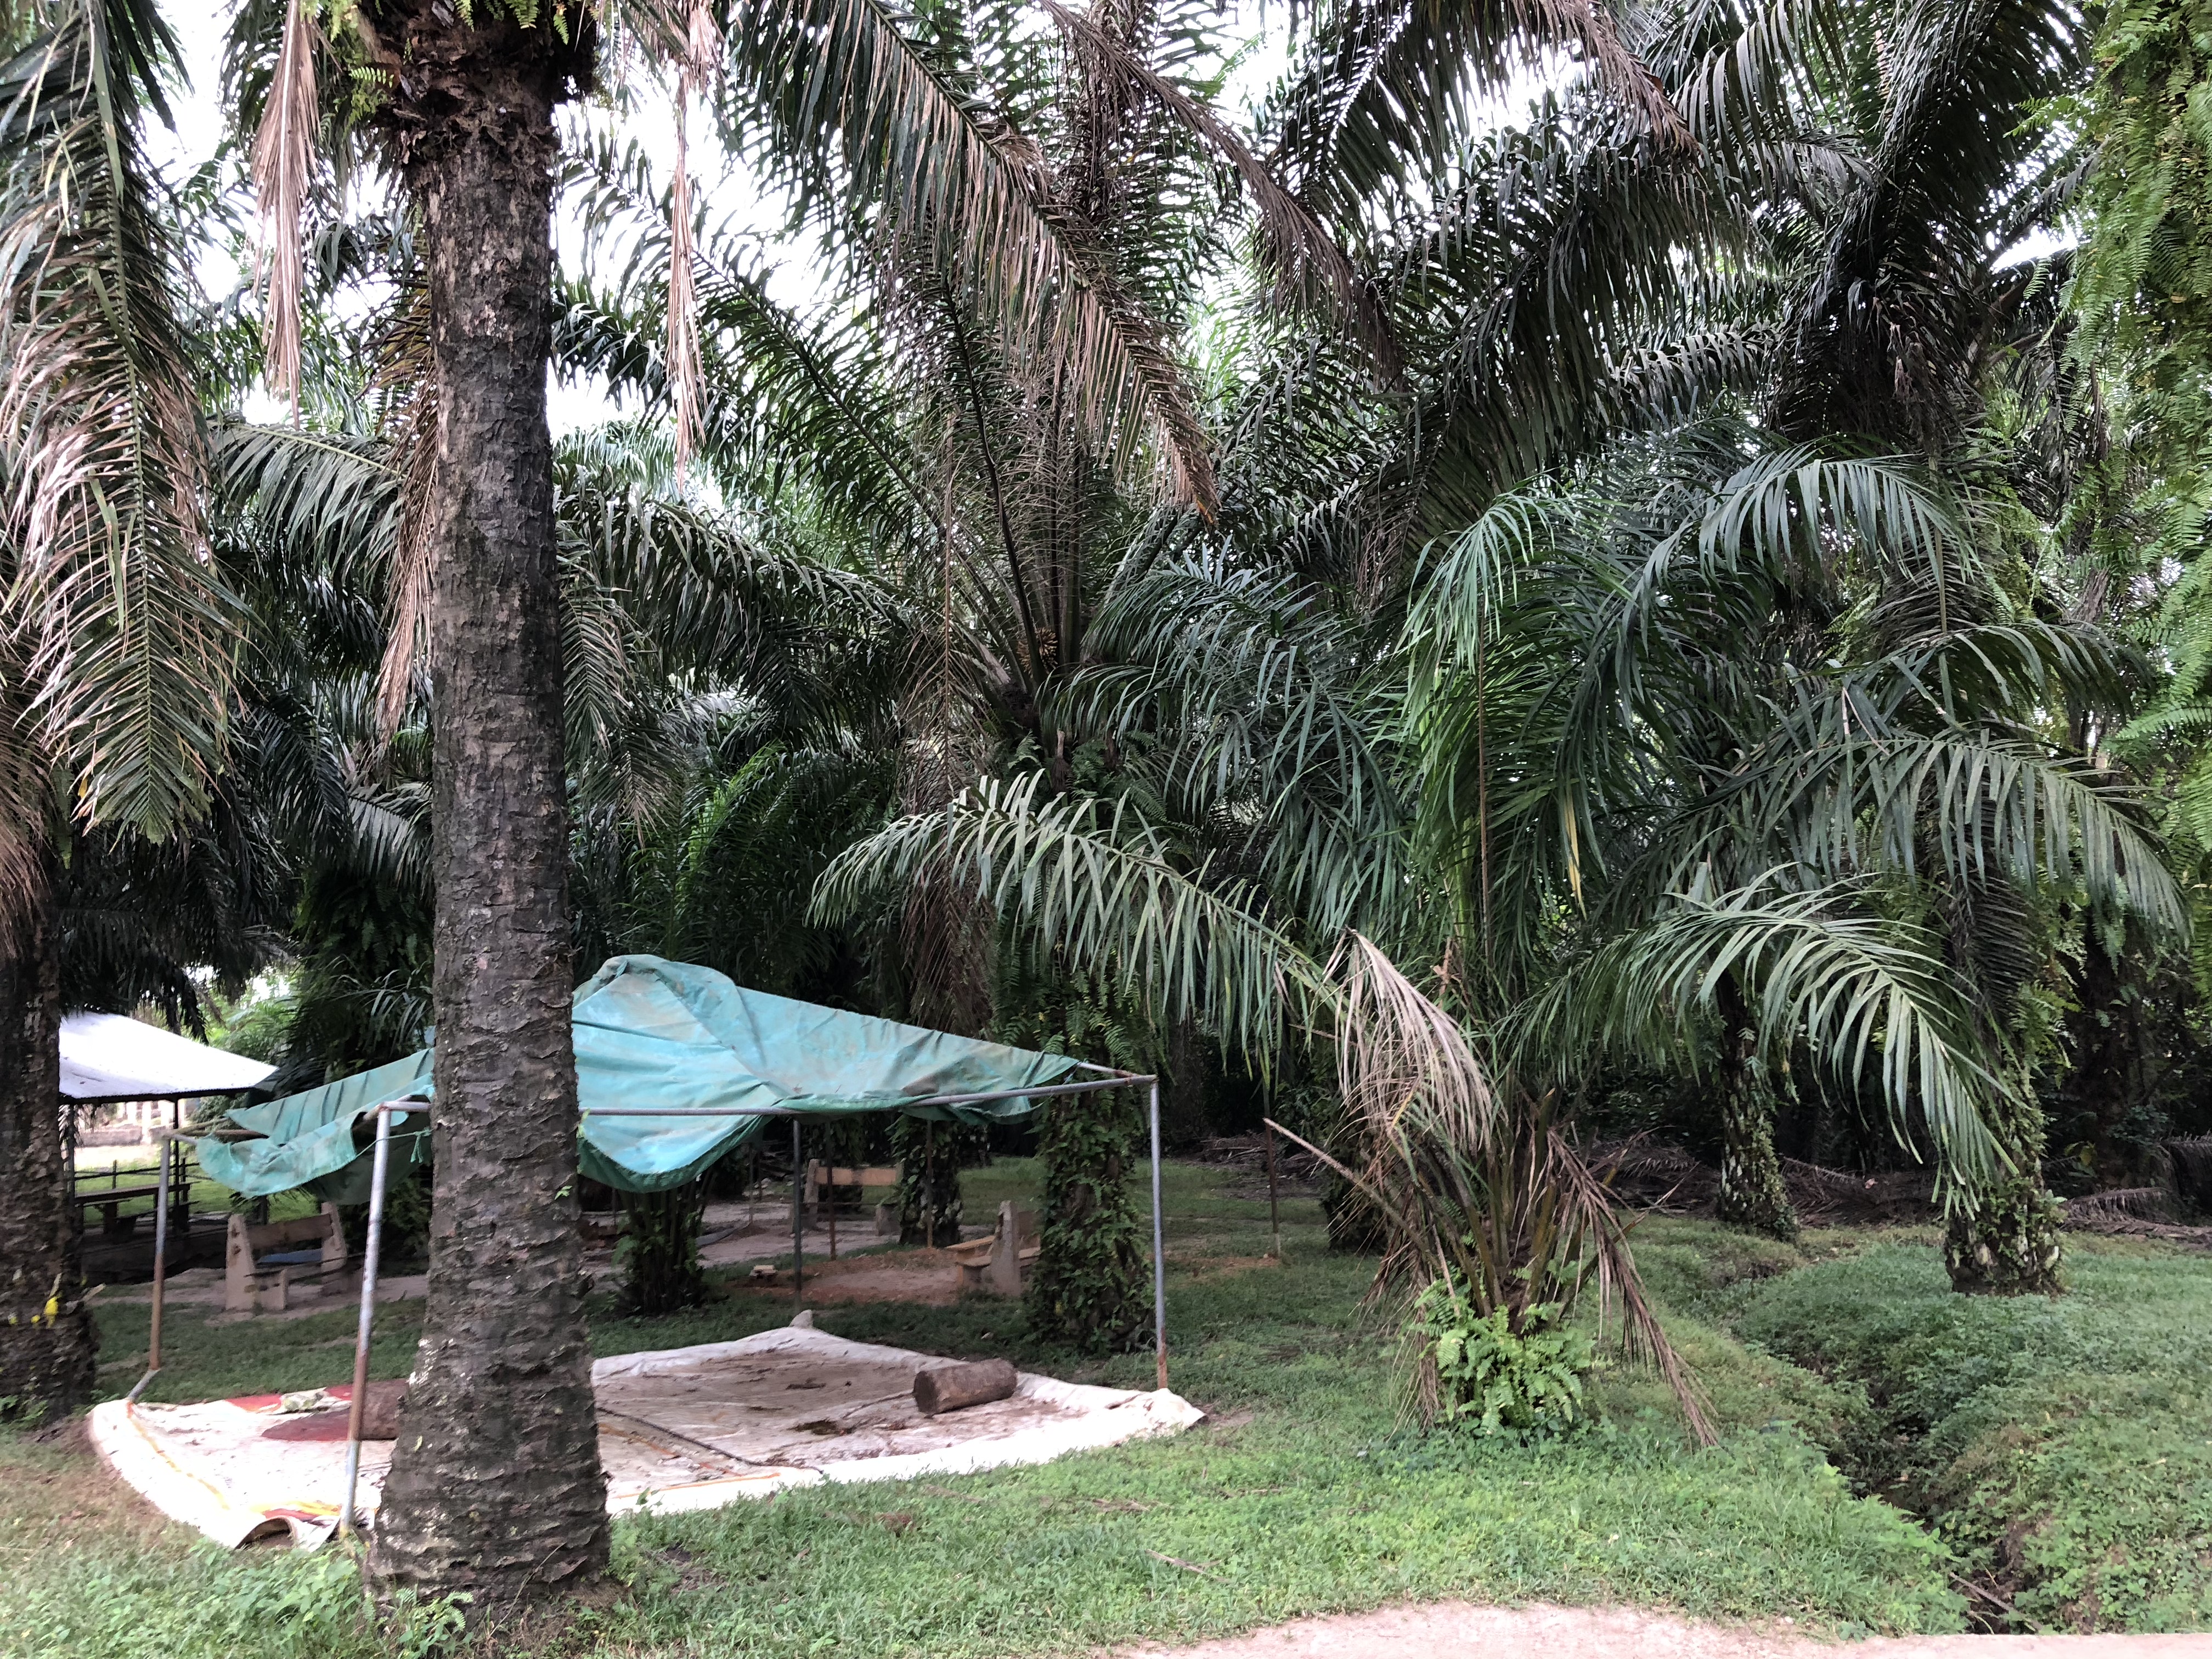 Oil palms near the Serendipalm processing facility.